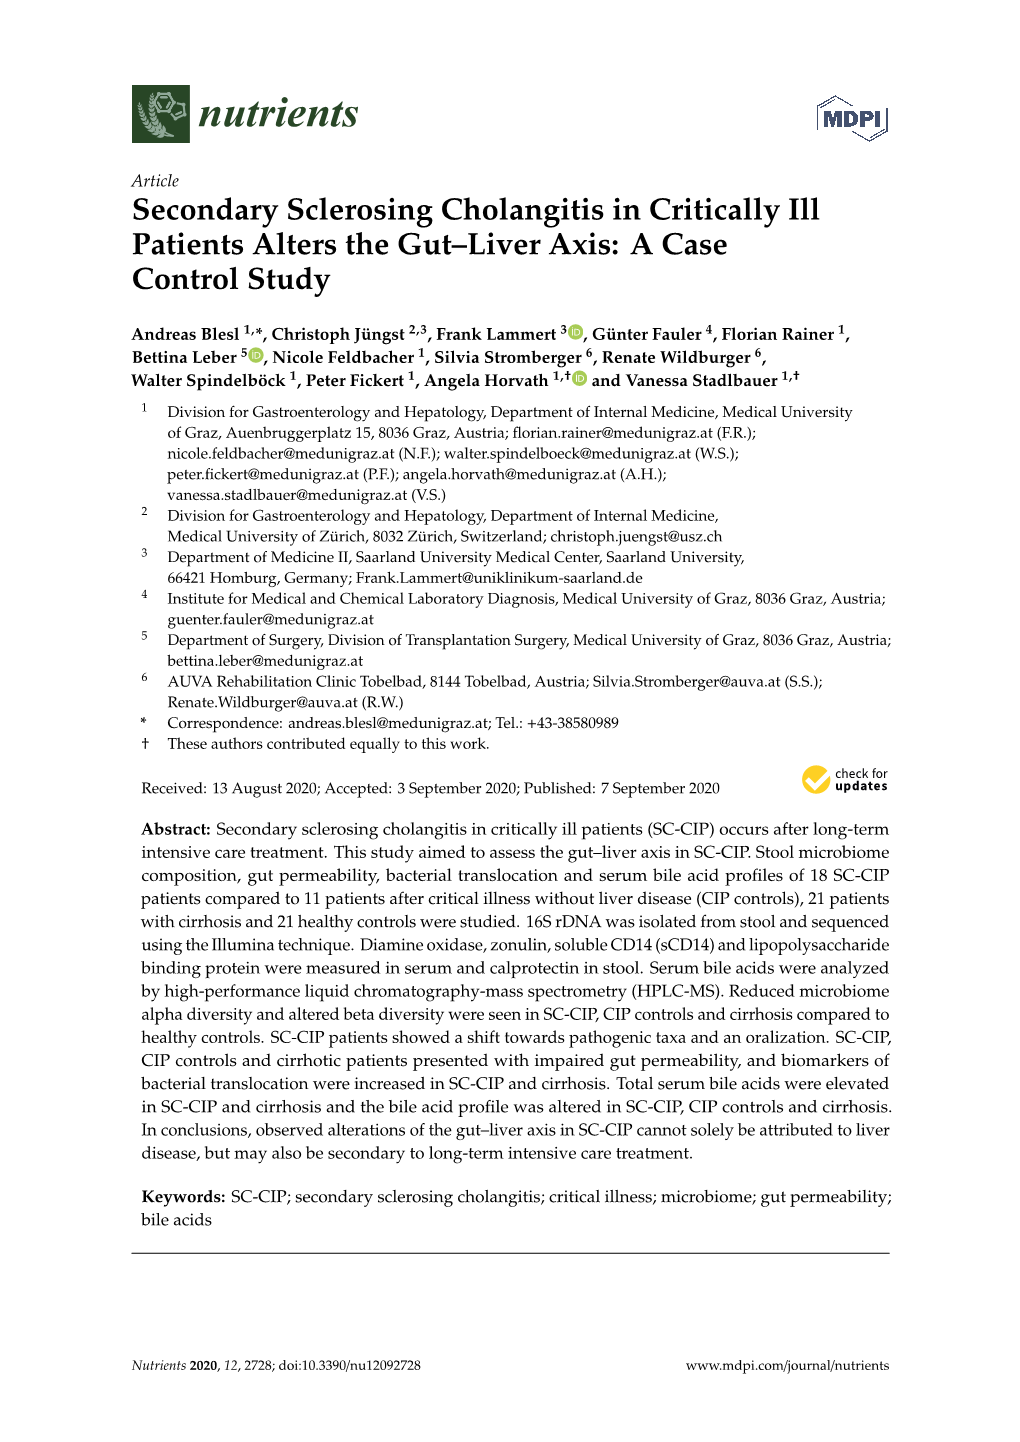 Secondary Sclerosing Cholangitis in Critically Ill Patients Alters the Gut–Liver Axis: a Case Control Study